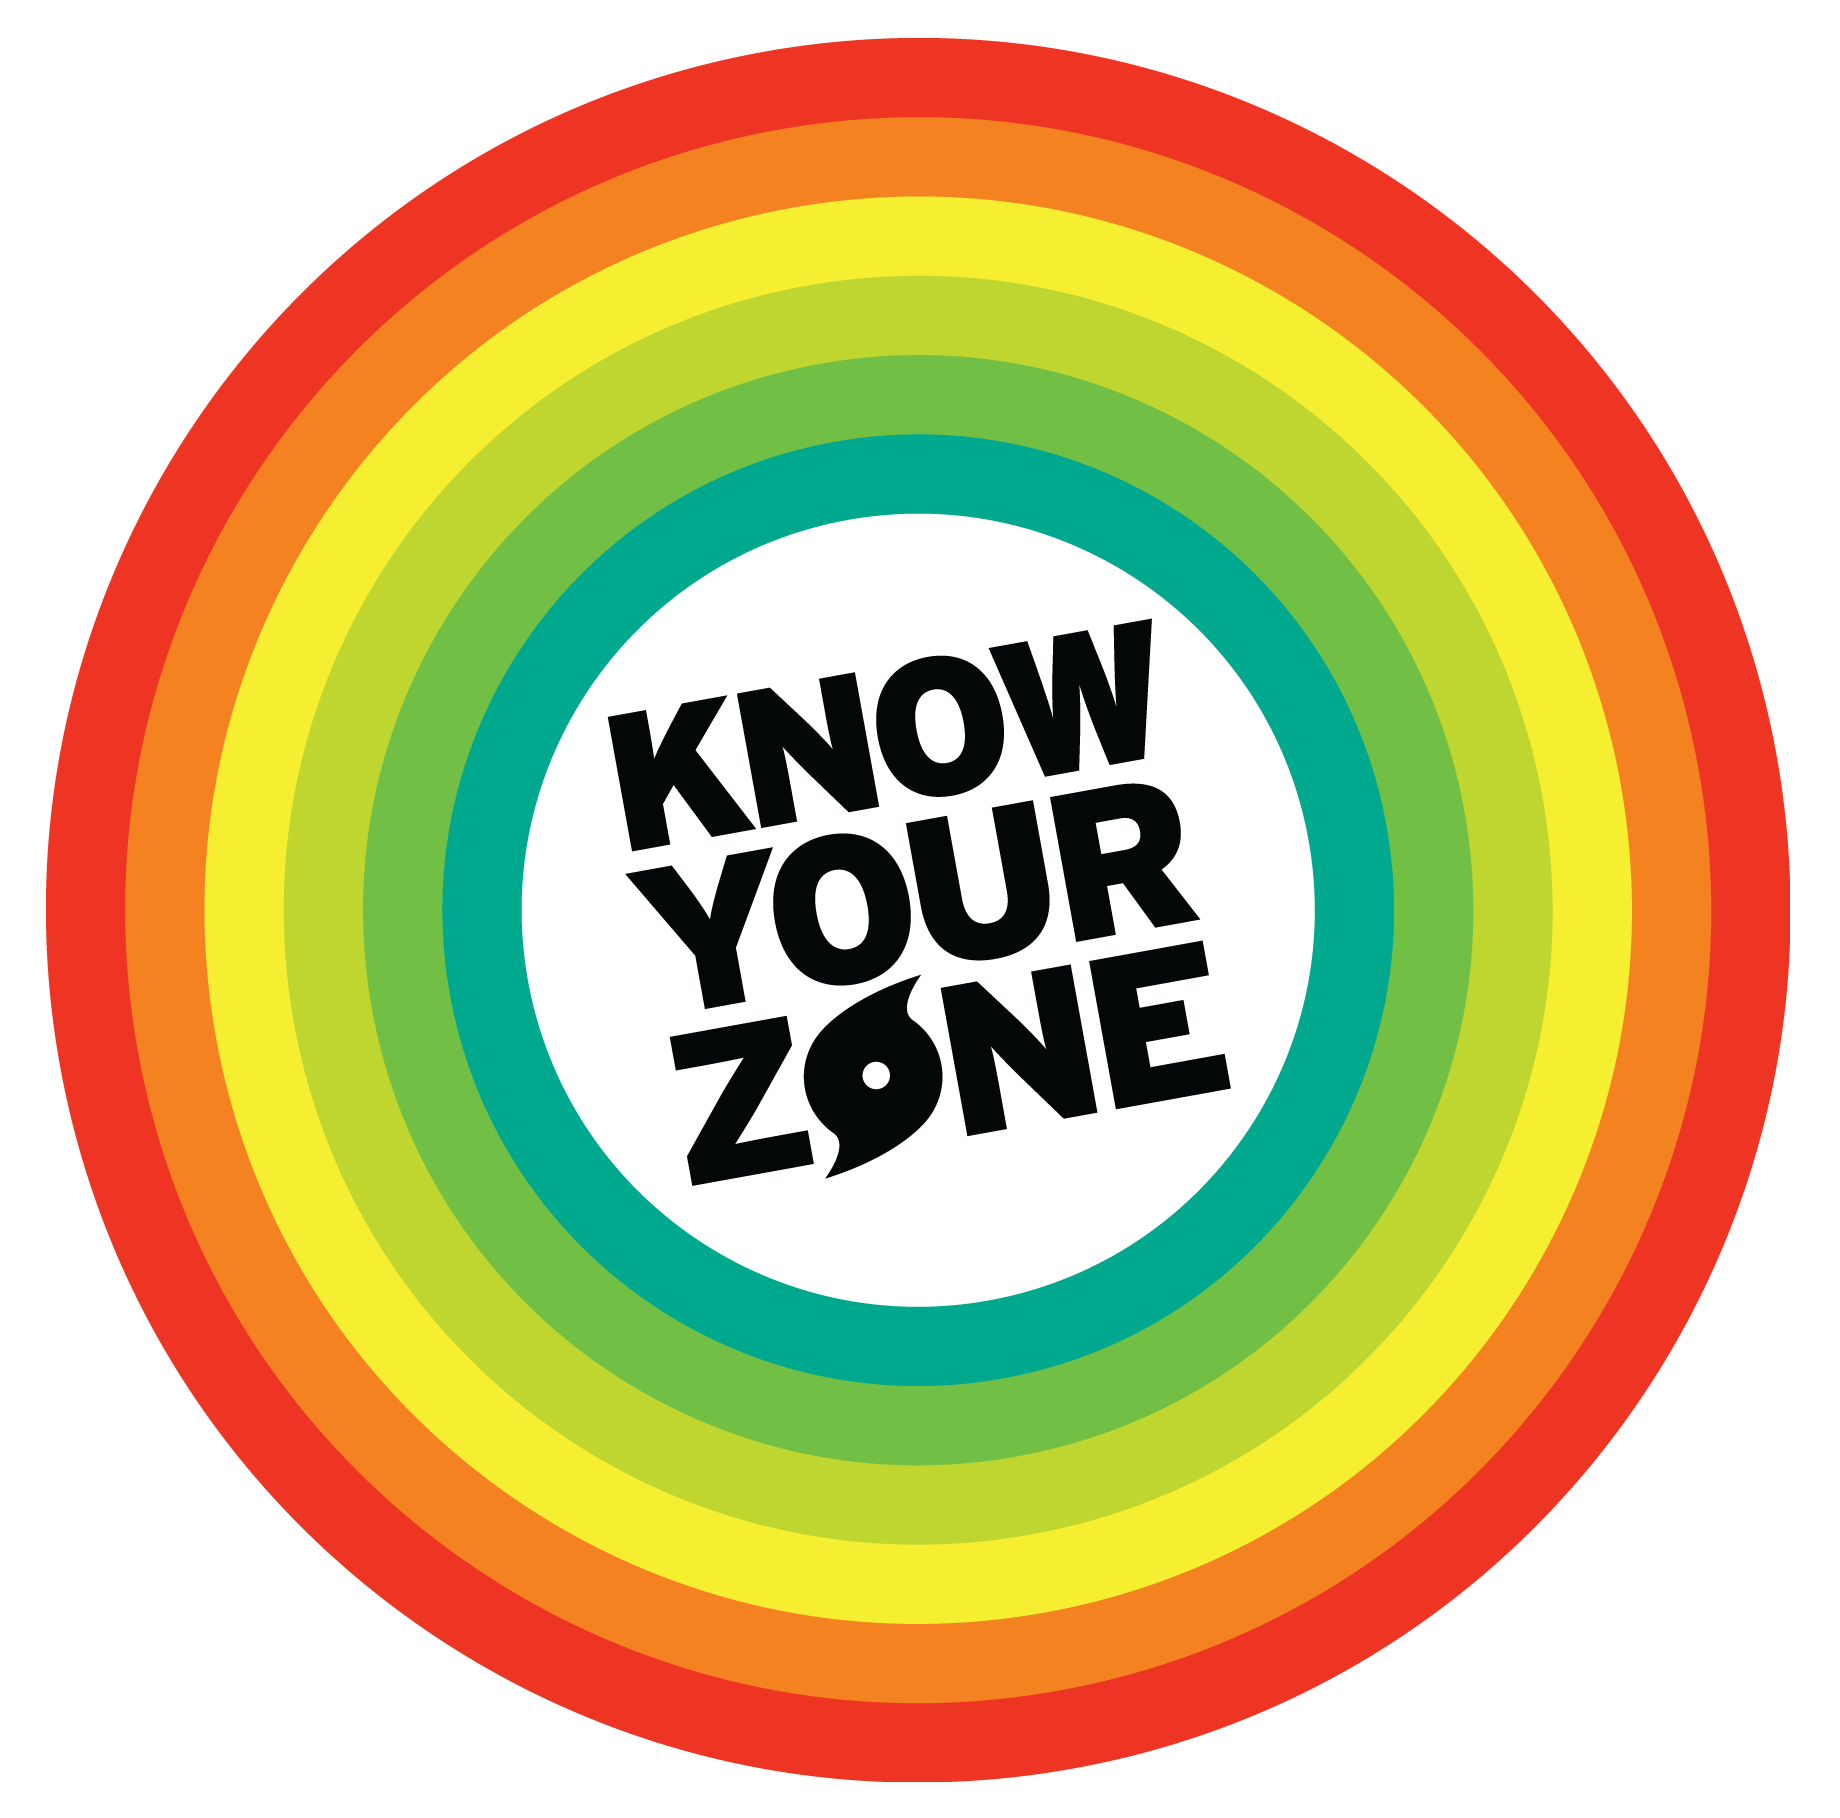 Project Image for Identity, OEM Know Your Zone Campaign